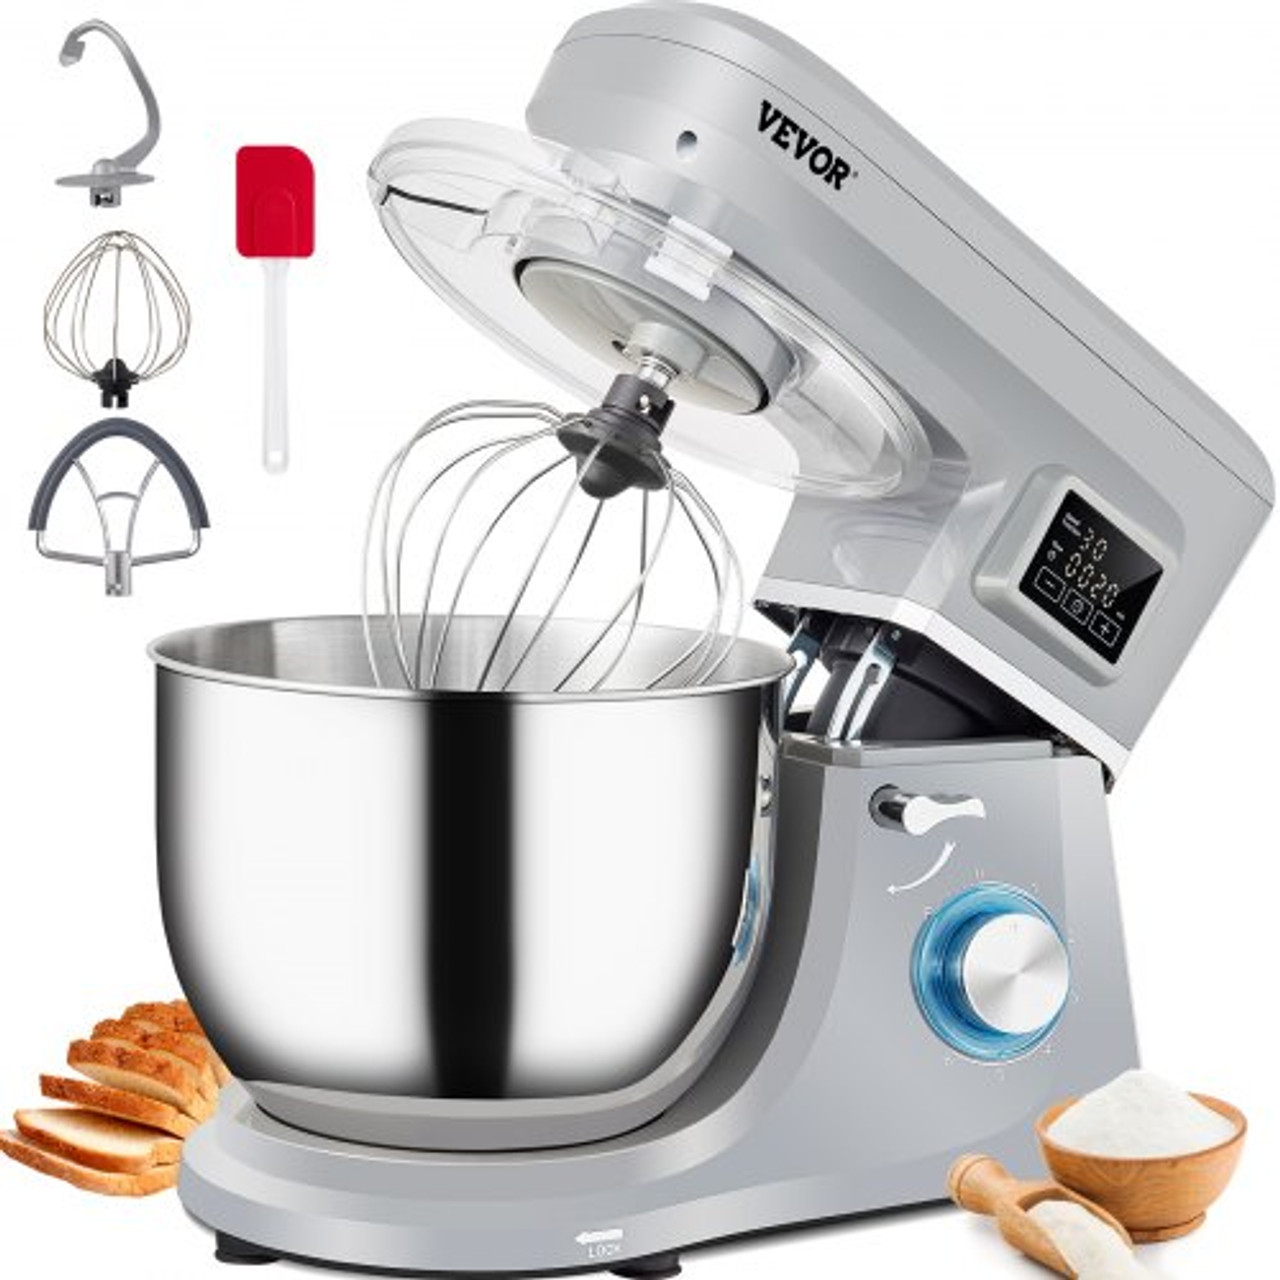 Stand Mixer, 660W Electric Dough Mixer with 6 Speeds LCD Screen Timing, Tilt-Head Food Mixer with 7.4 Qt Stainless Steel Bowl, Dough Hook, Flat Beater, Whisk, Scraper, Splash-Proof Cover - Gray